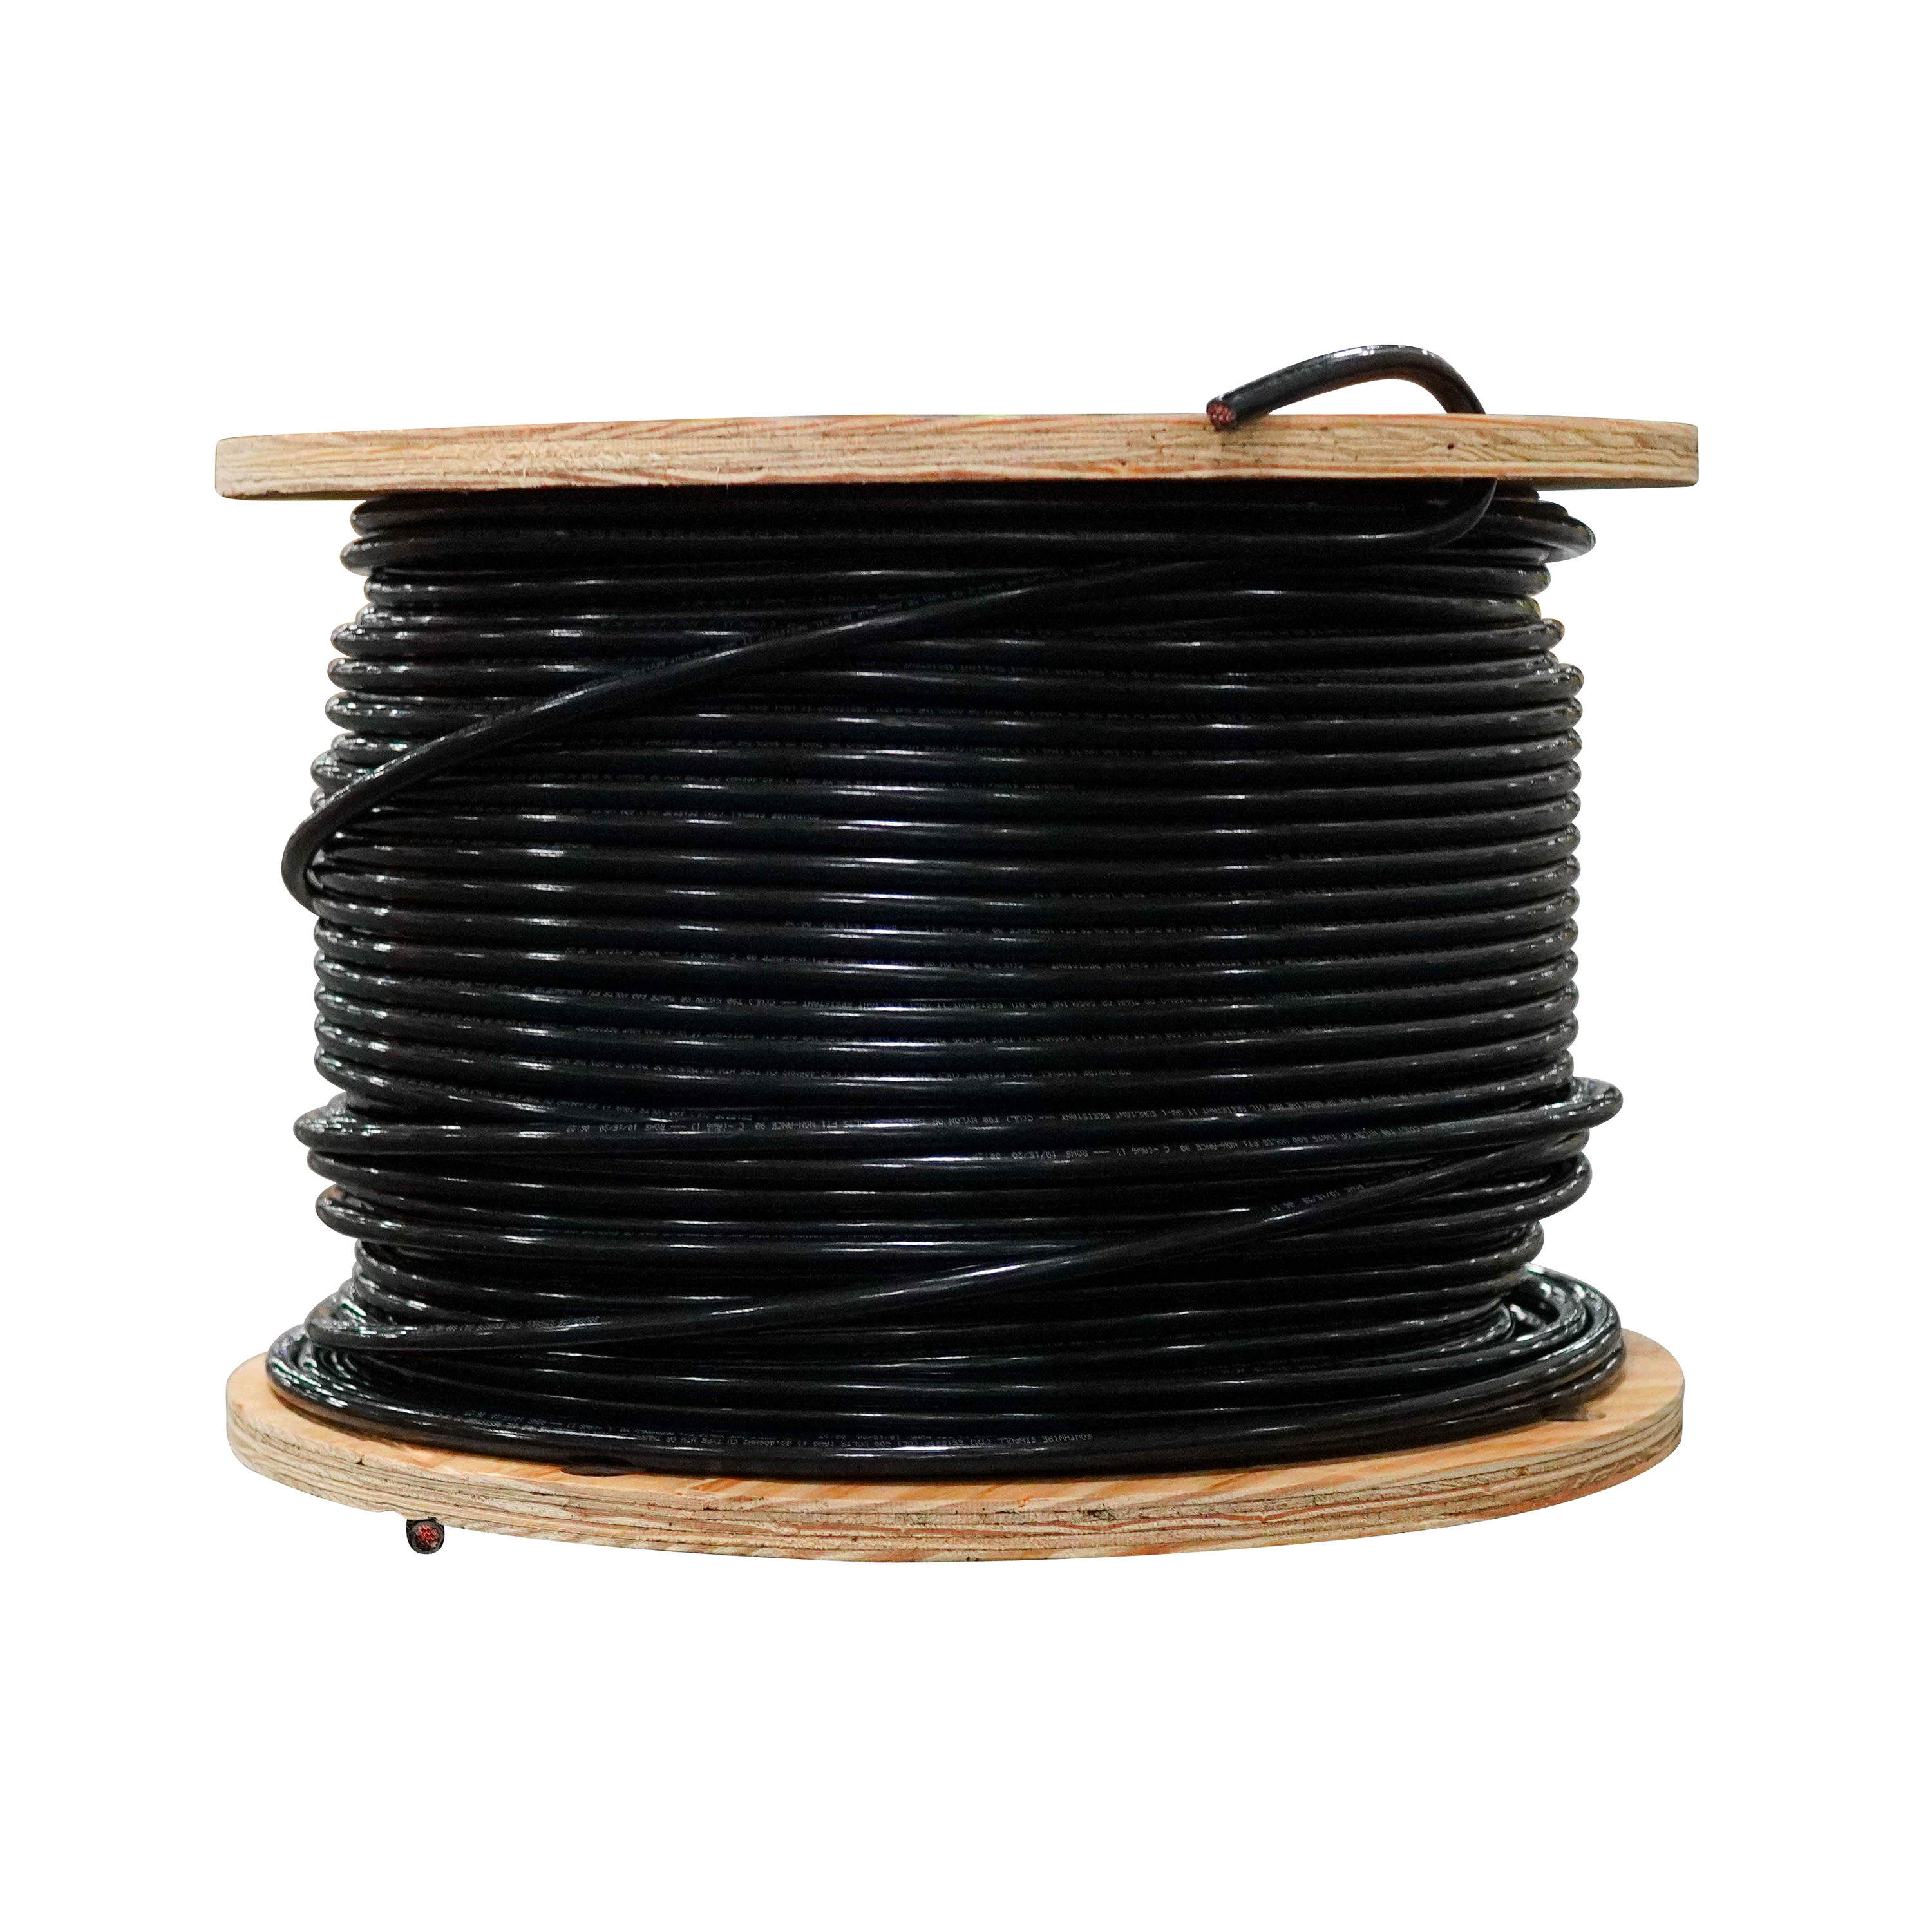 1000 feet reel, 10/3 w/ Ground, flat HD copper submersible pump wire, UL  listed, discounted